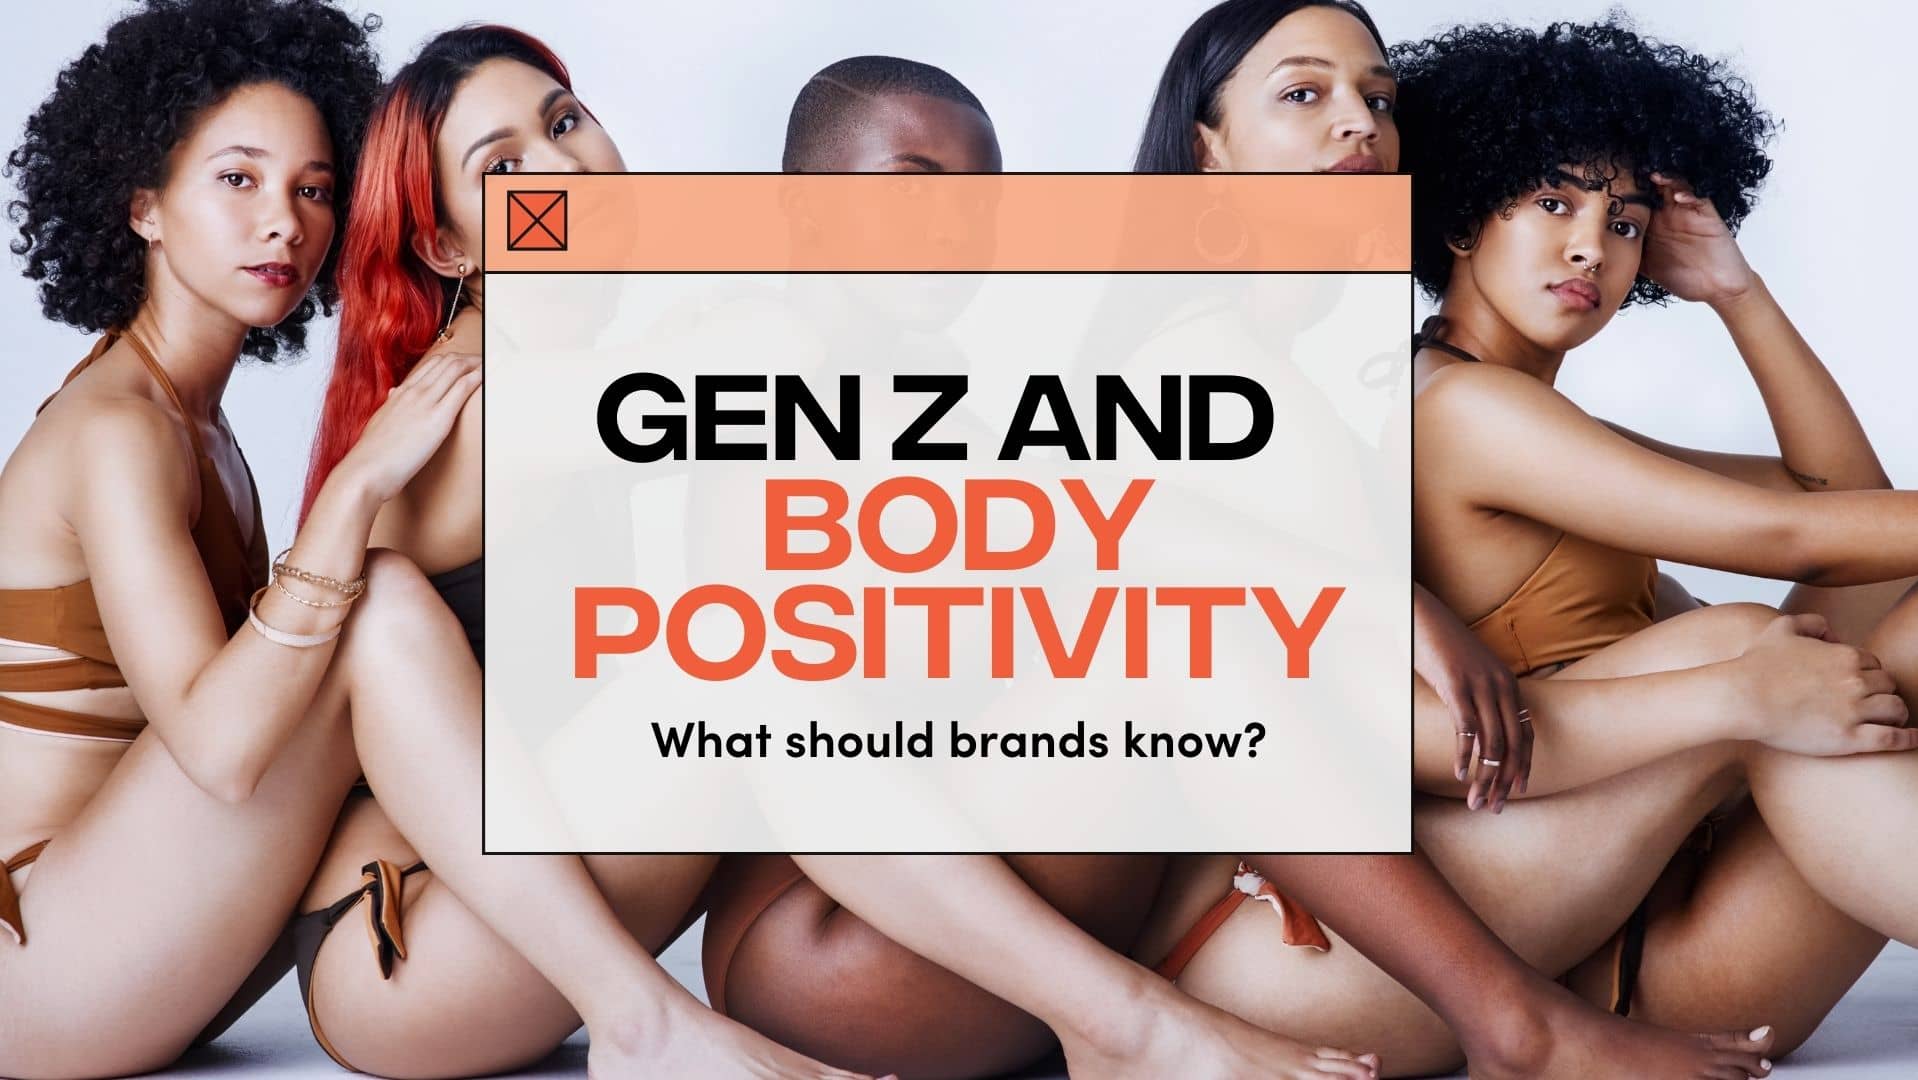 Gen Z women are embracing large breasts in latest body positivity